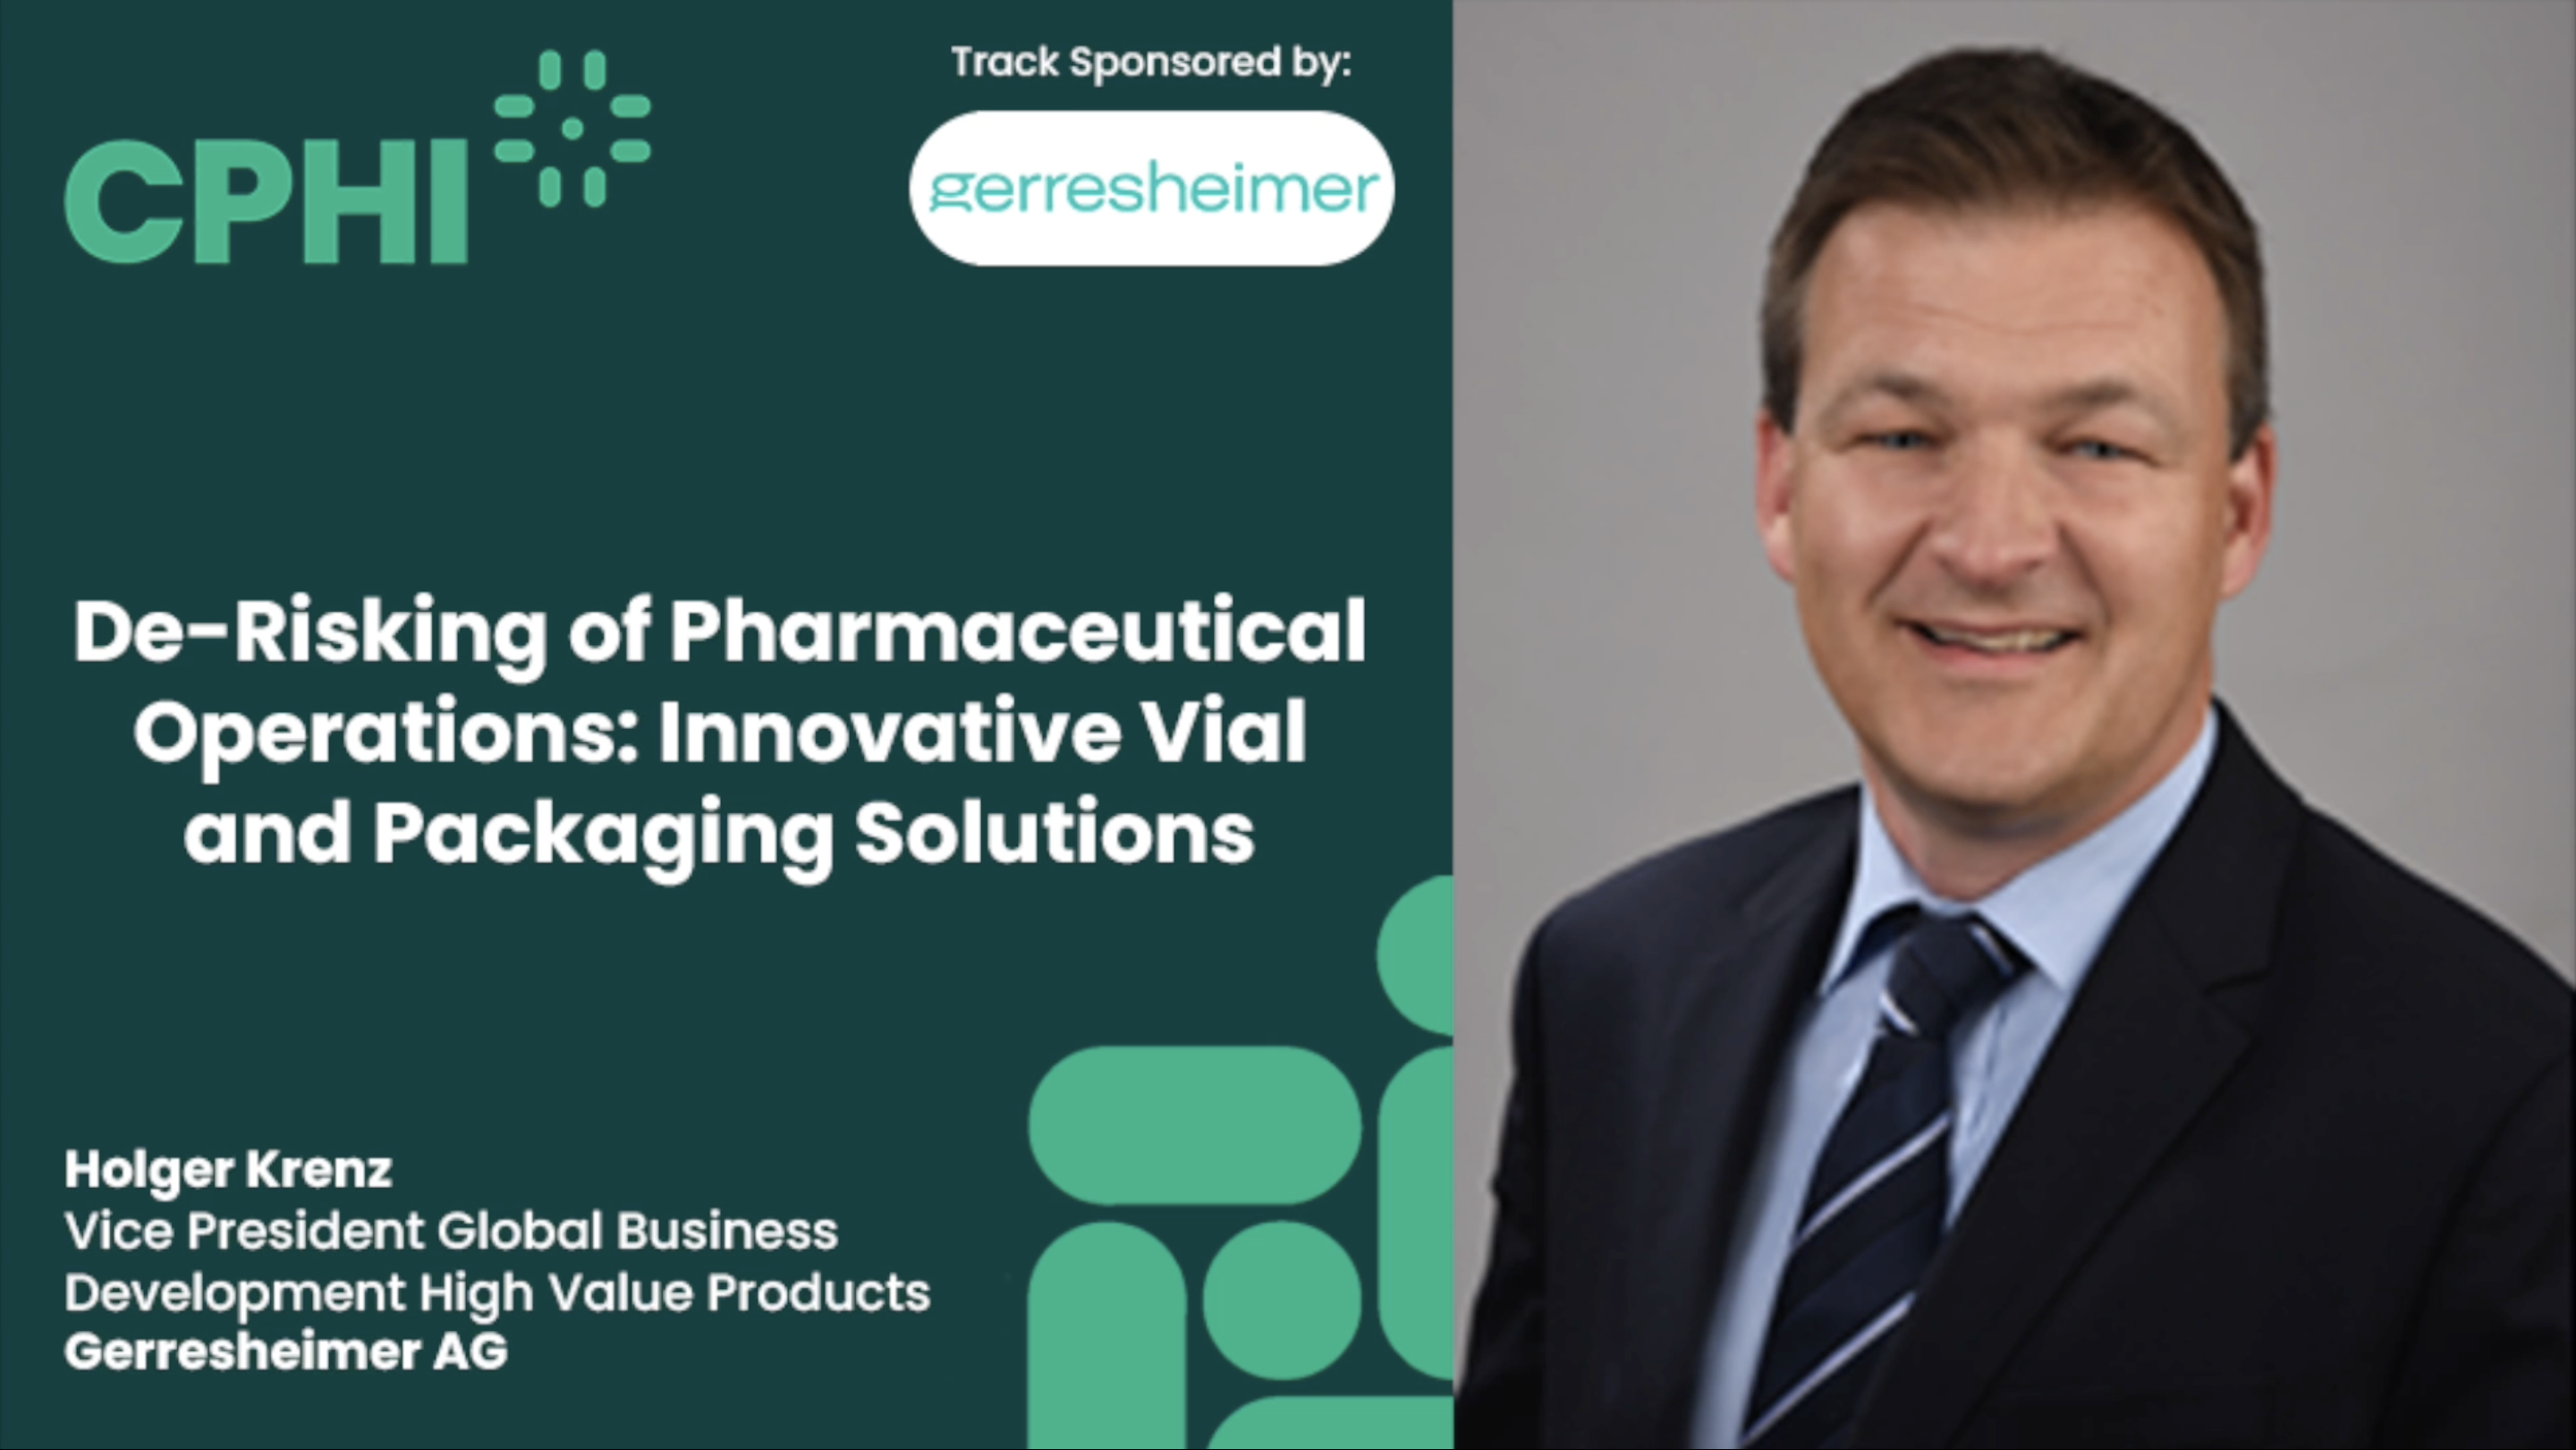 De-Risking of Pharmaceutical Operations: Innovative Vial and Packaging Solutions